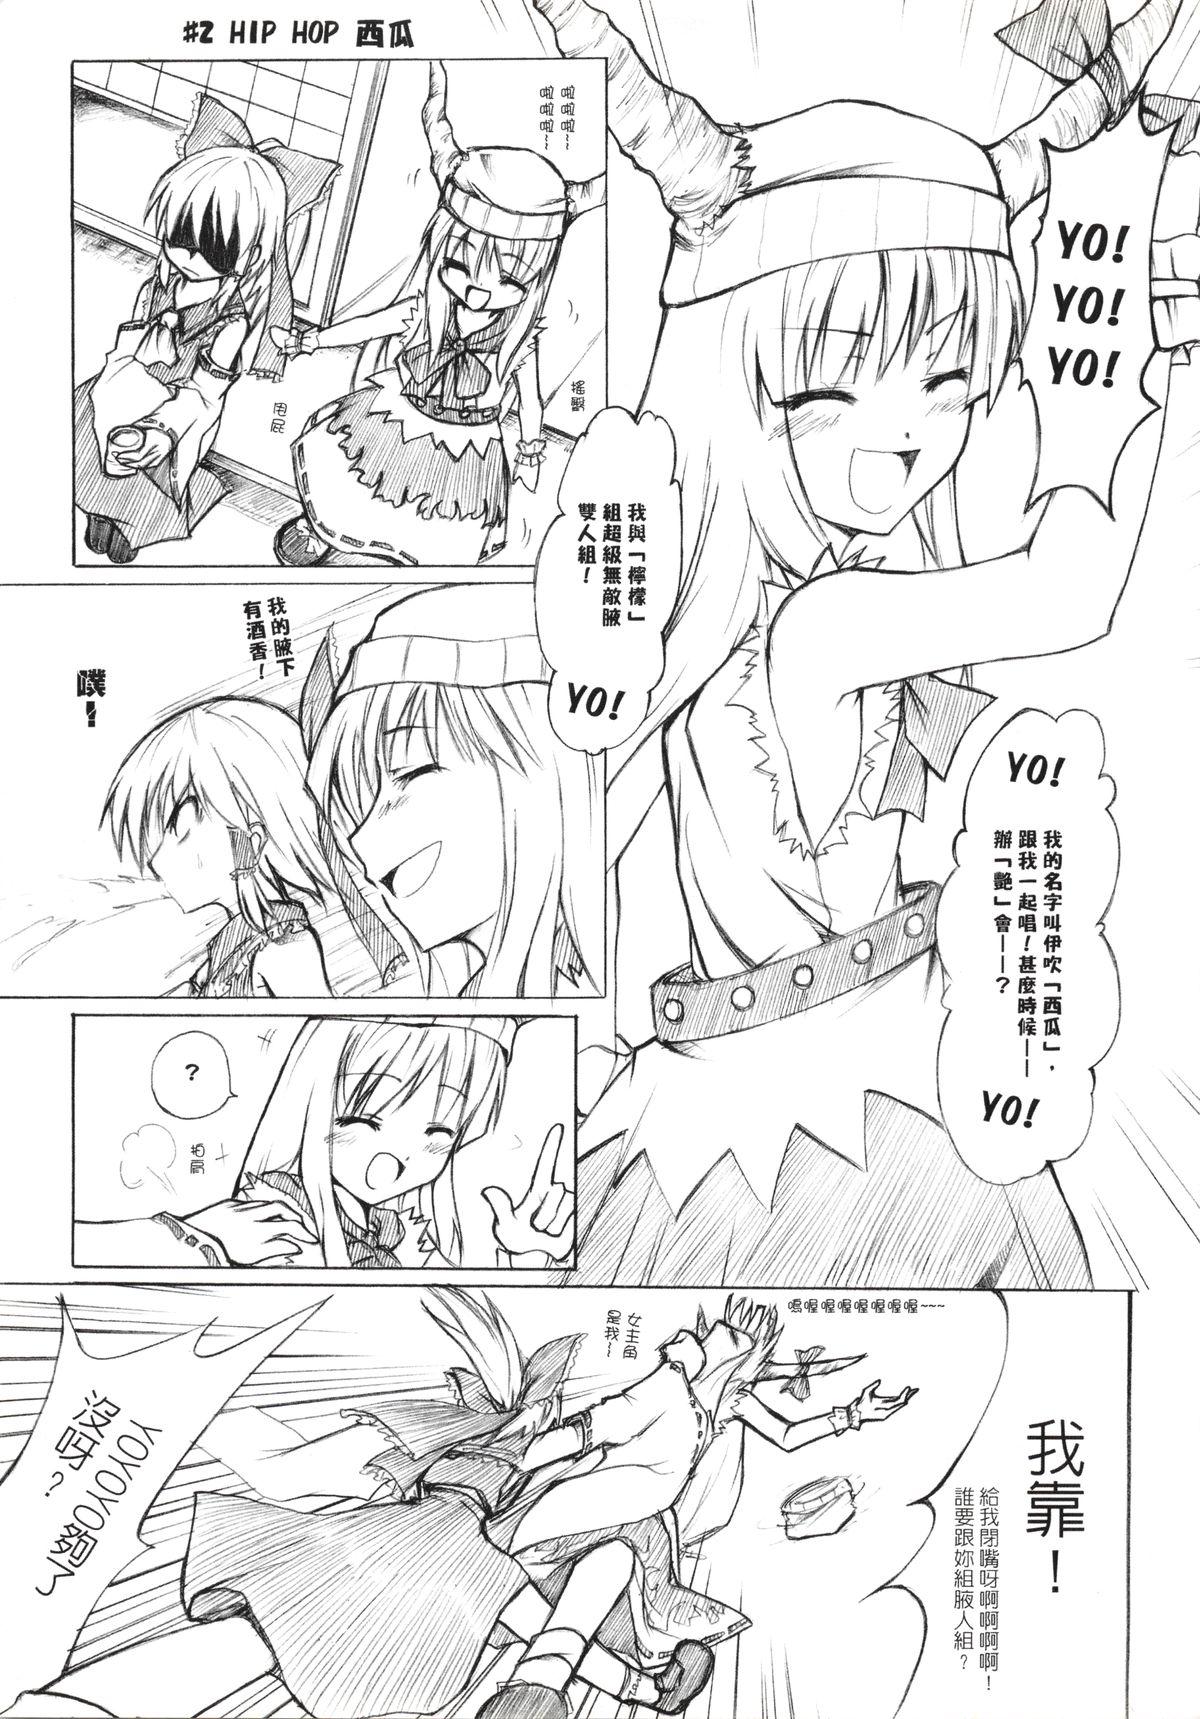 Gapes Gaping Asshole 紫隙間Die! - Touhou project Pasivo - Page 9